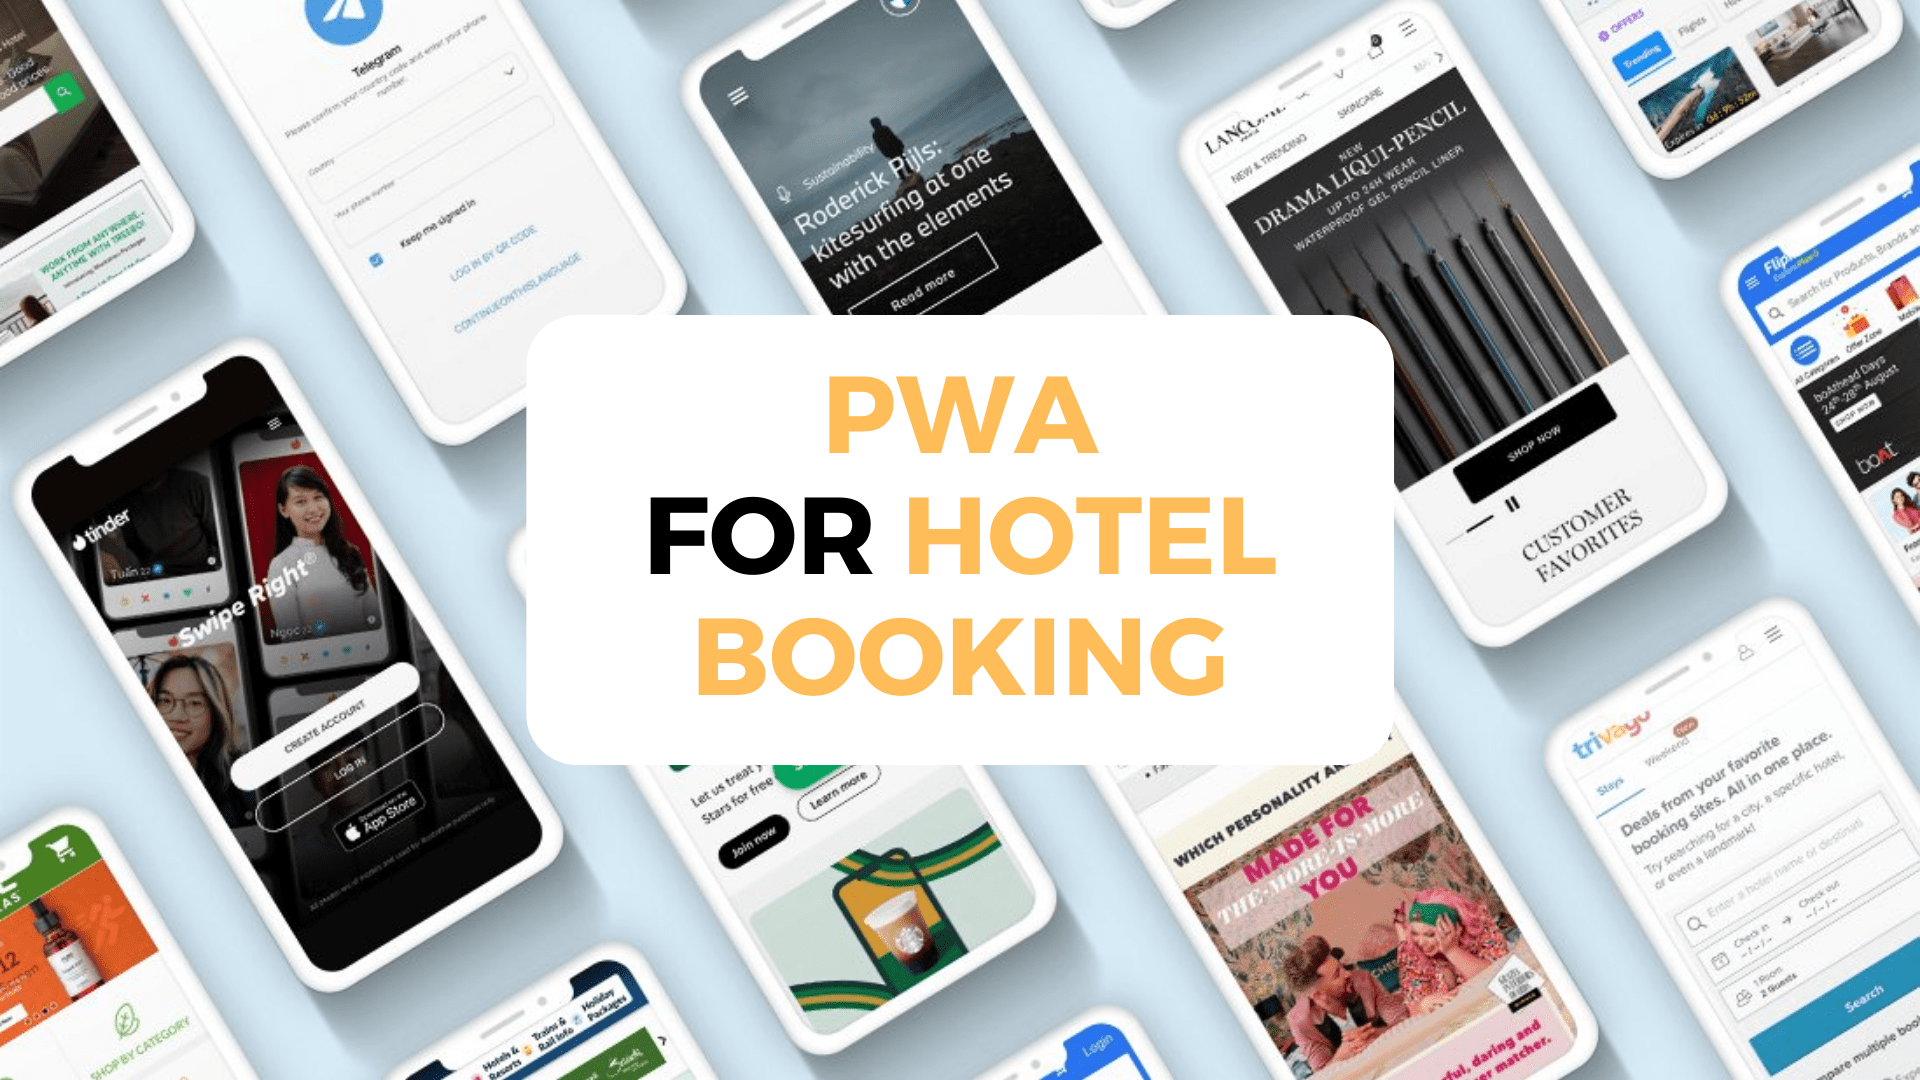 PWA for Hotel Booking: The ultimate solution for the business